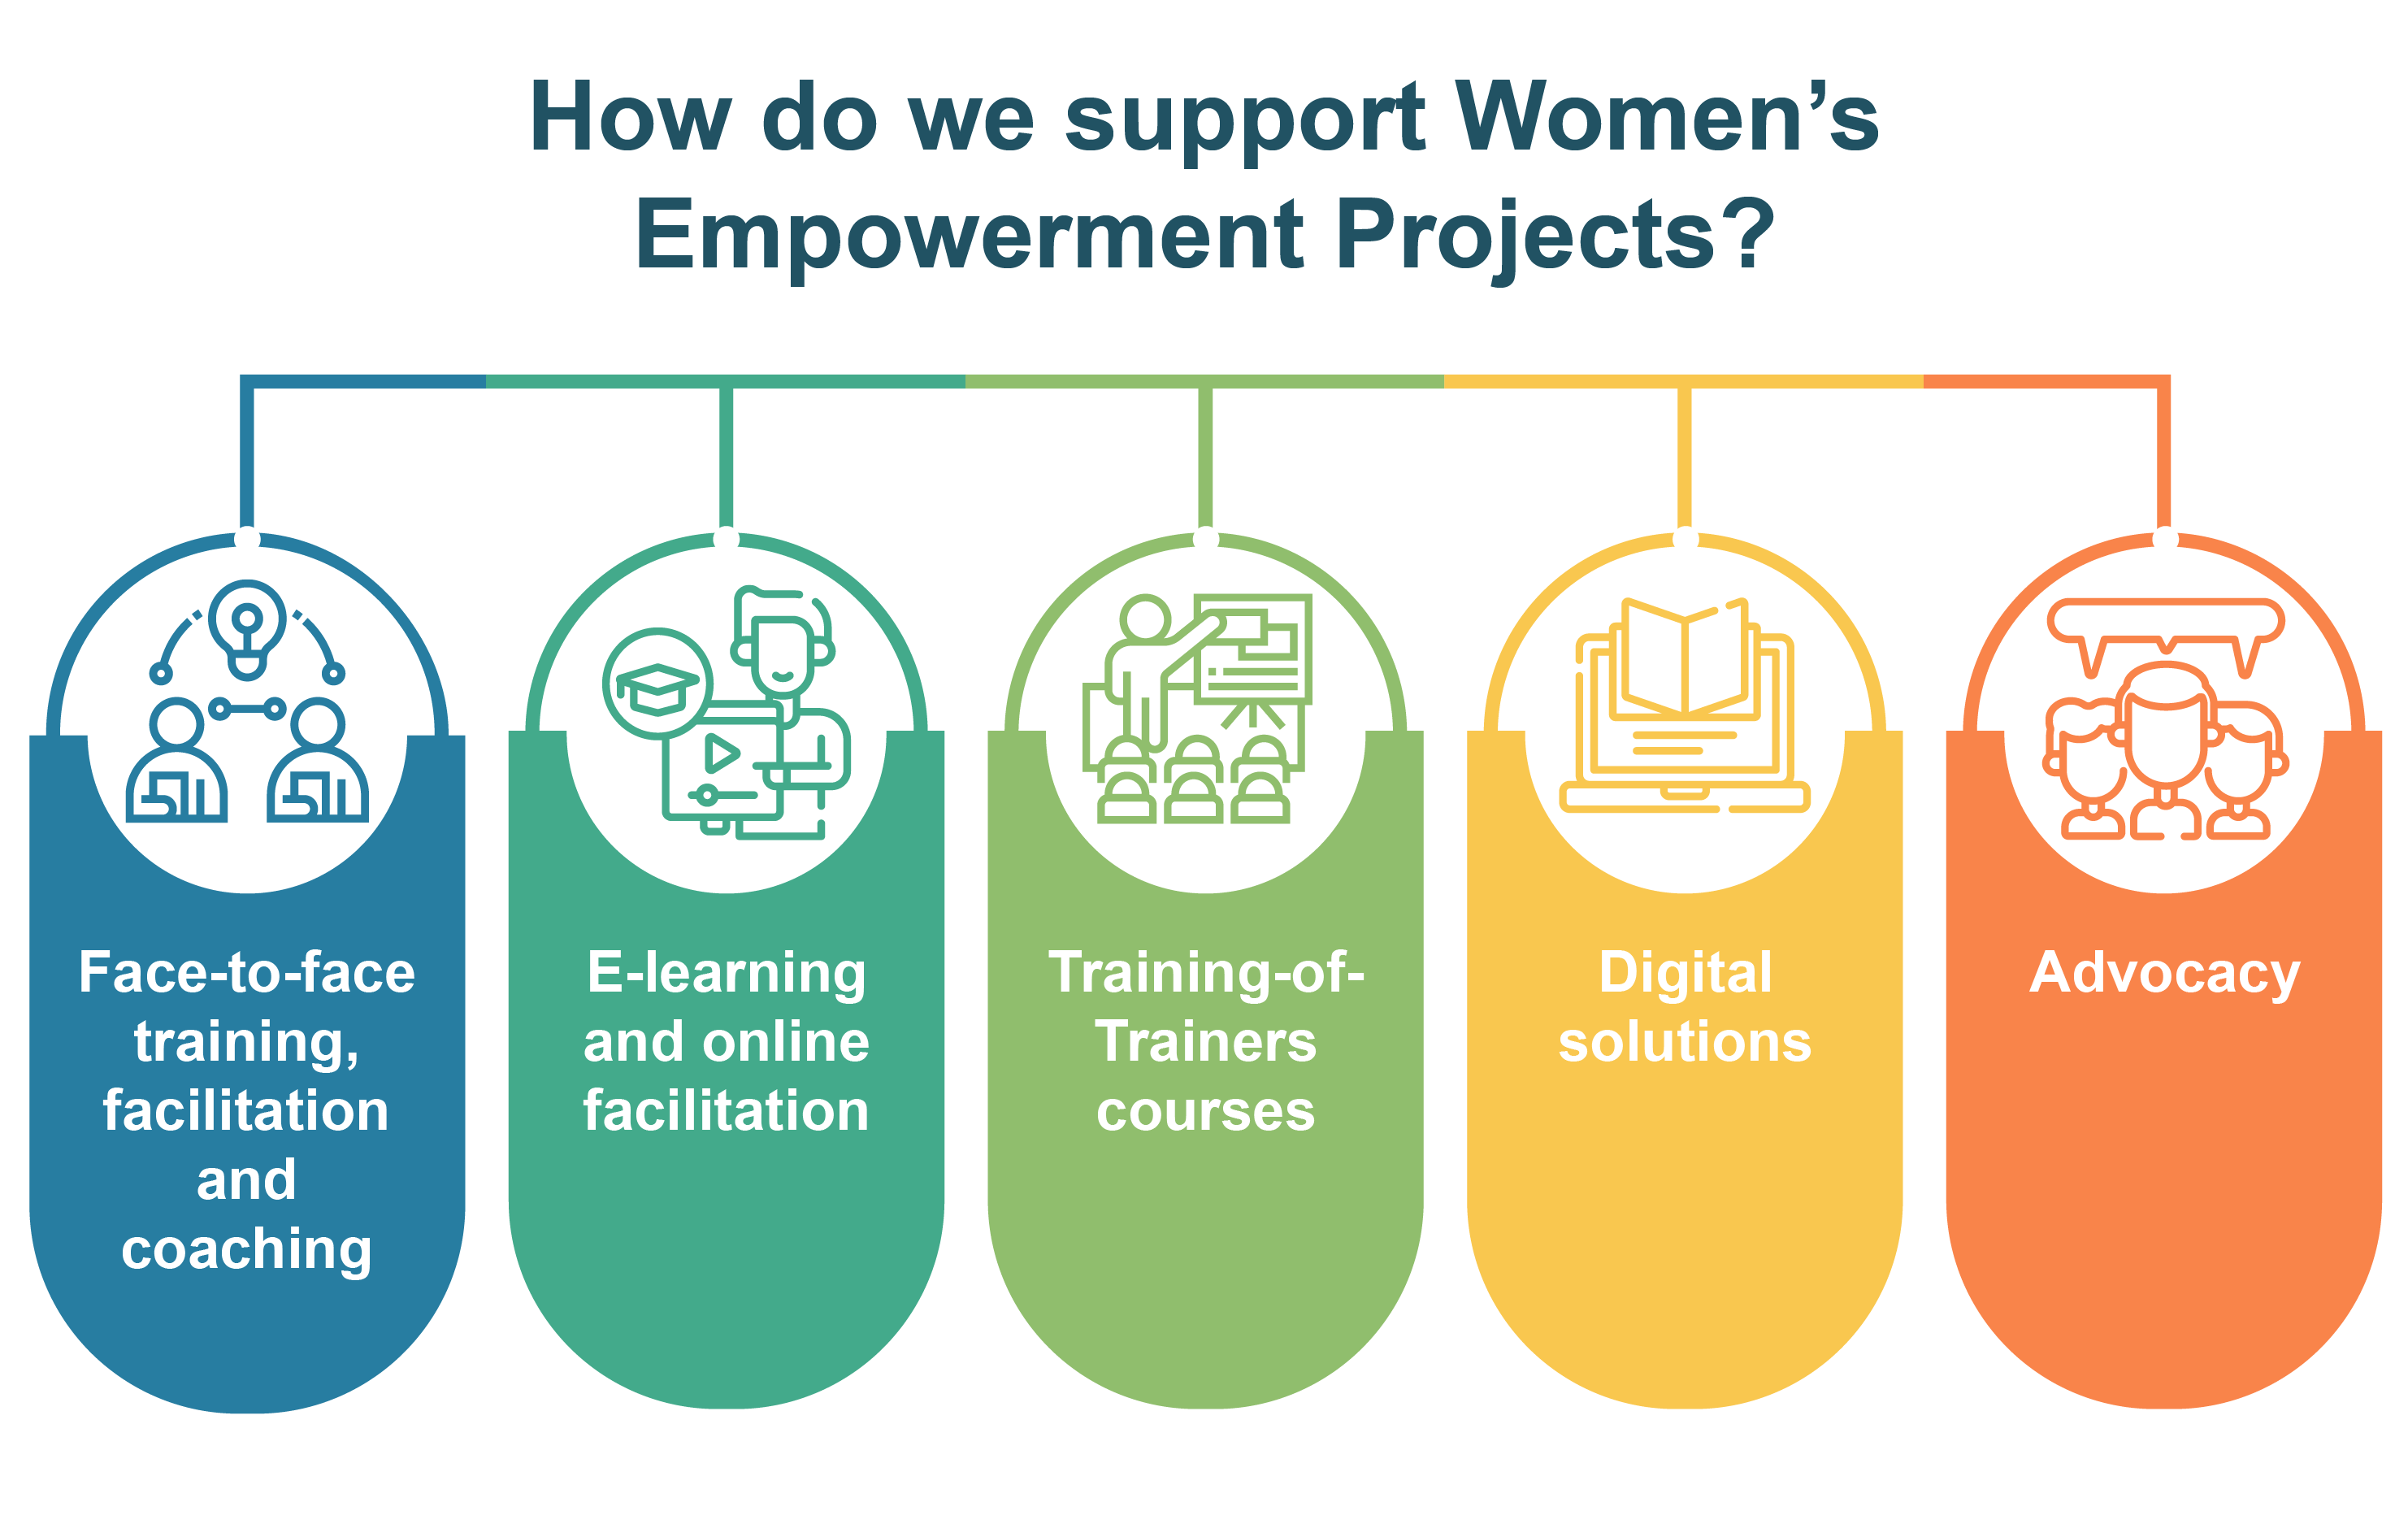 Why are Female Empowerment Organizations Needed?